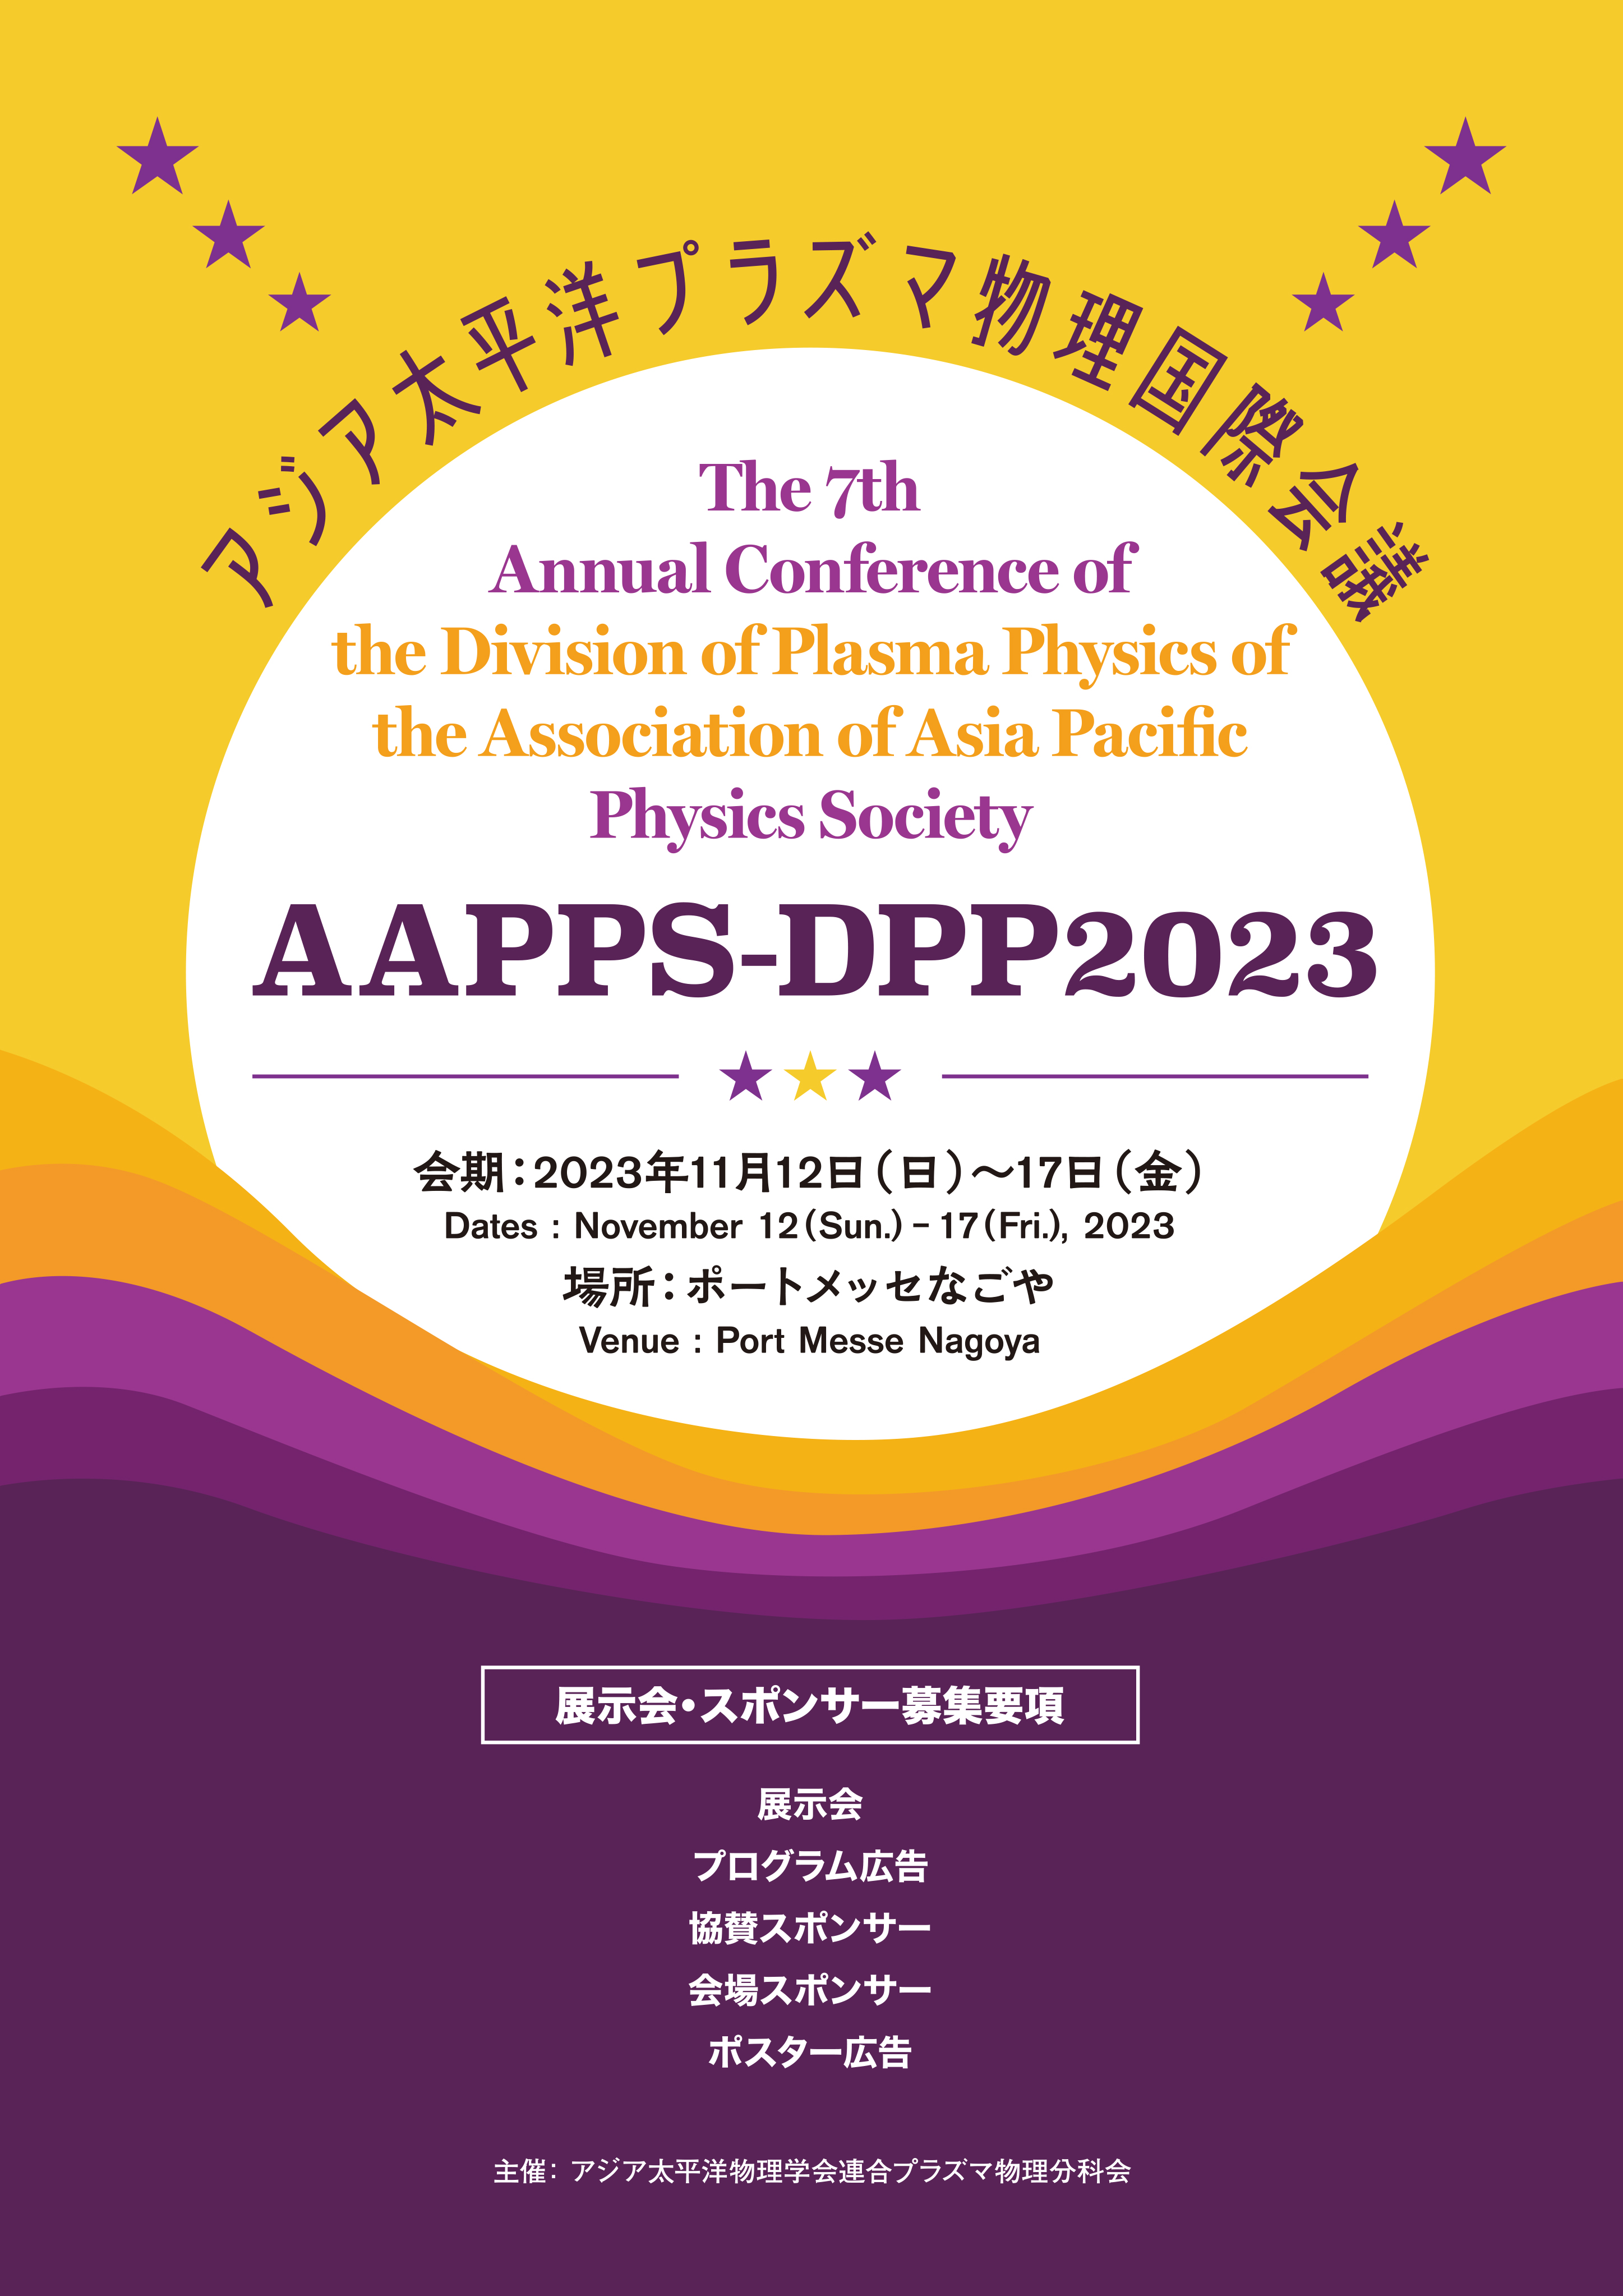 The 7th Annual Conference of the Division of Plasma Physics of the Association of Asia Pacific Physics Society / 2023年 アジア太平洋プラズマ物理国際会議（AAPPS-DPP2023）